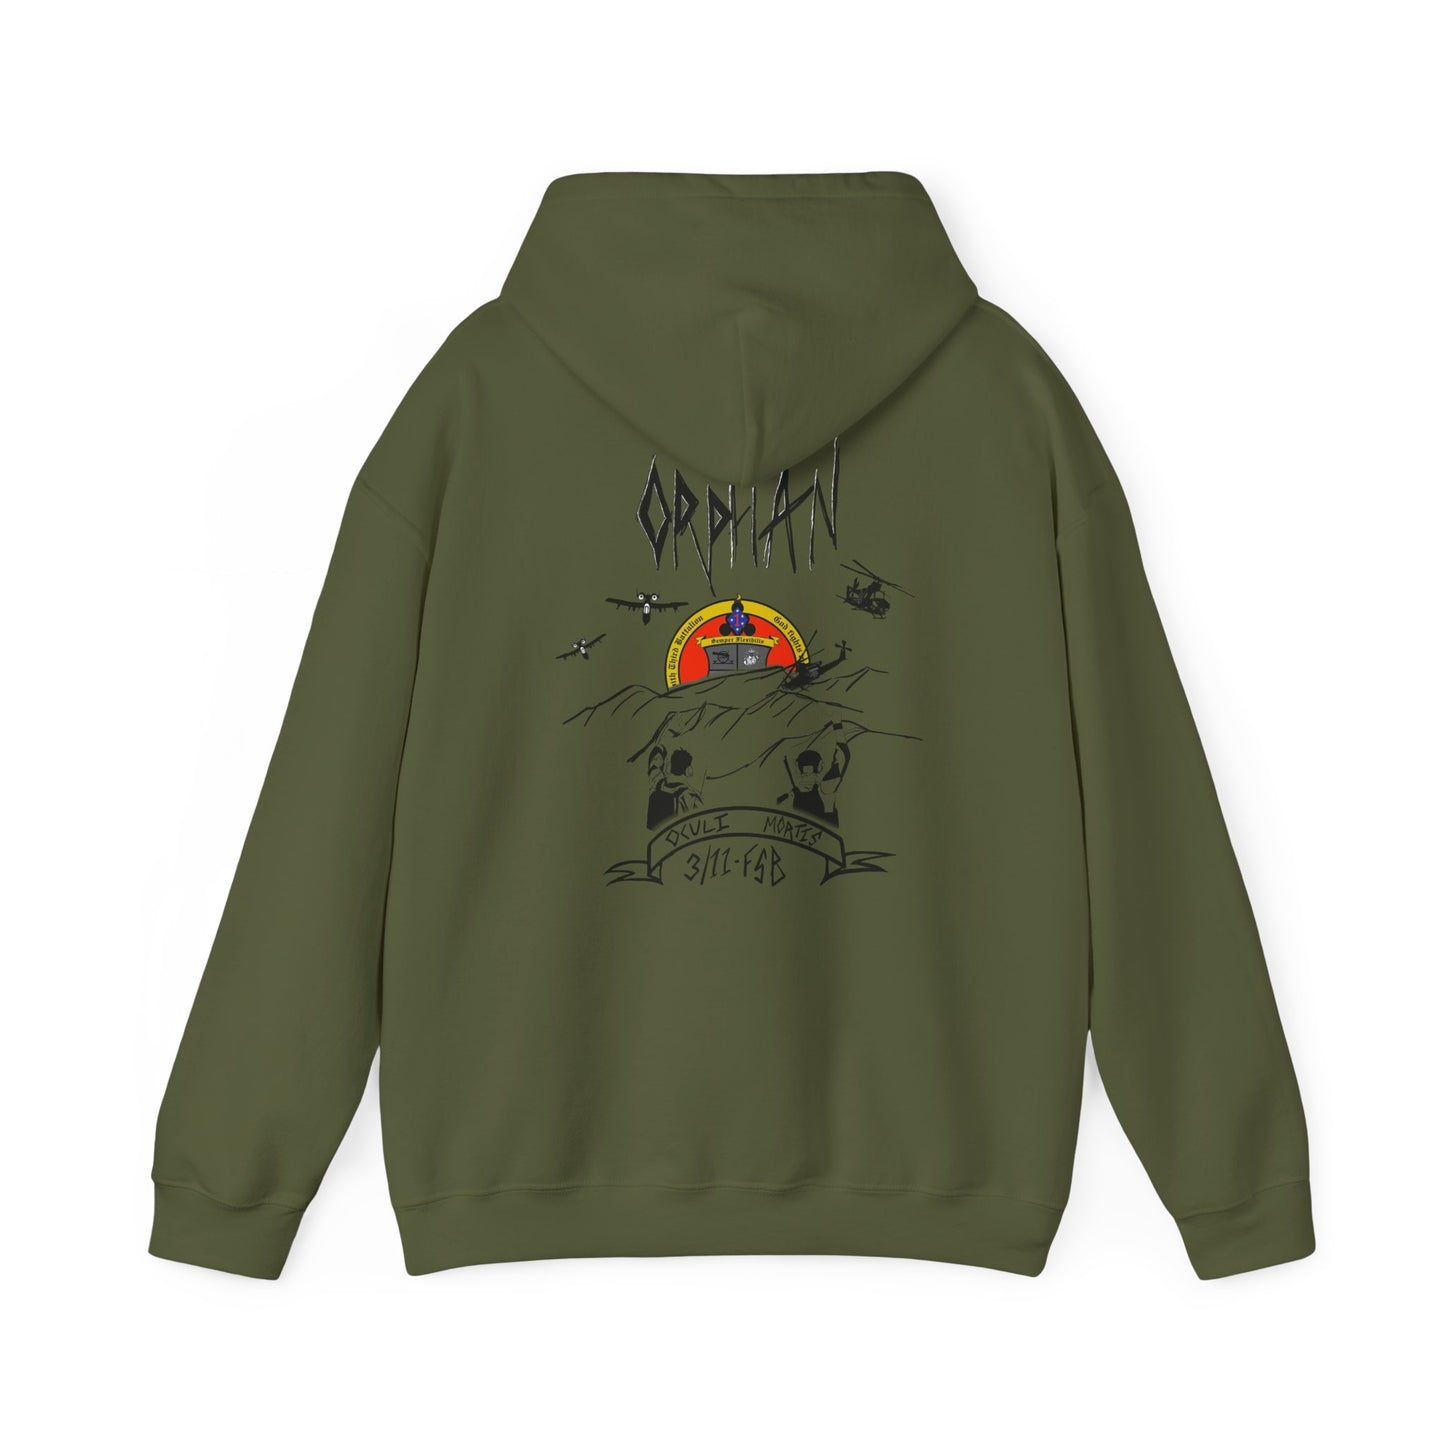 3/11 Fire Support Battalion Hoodie